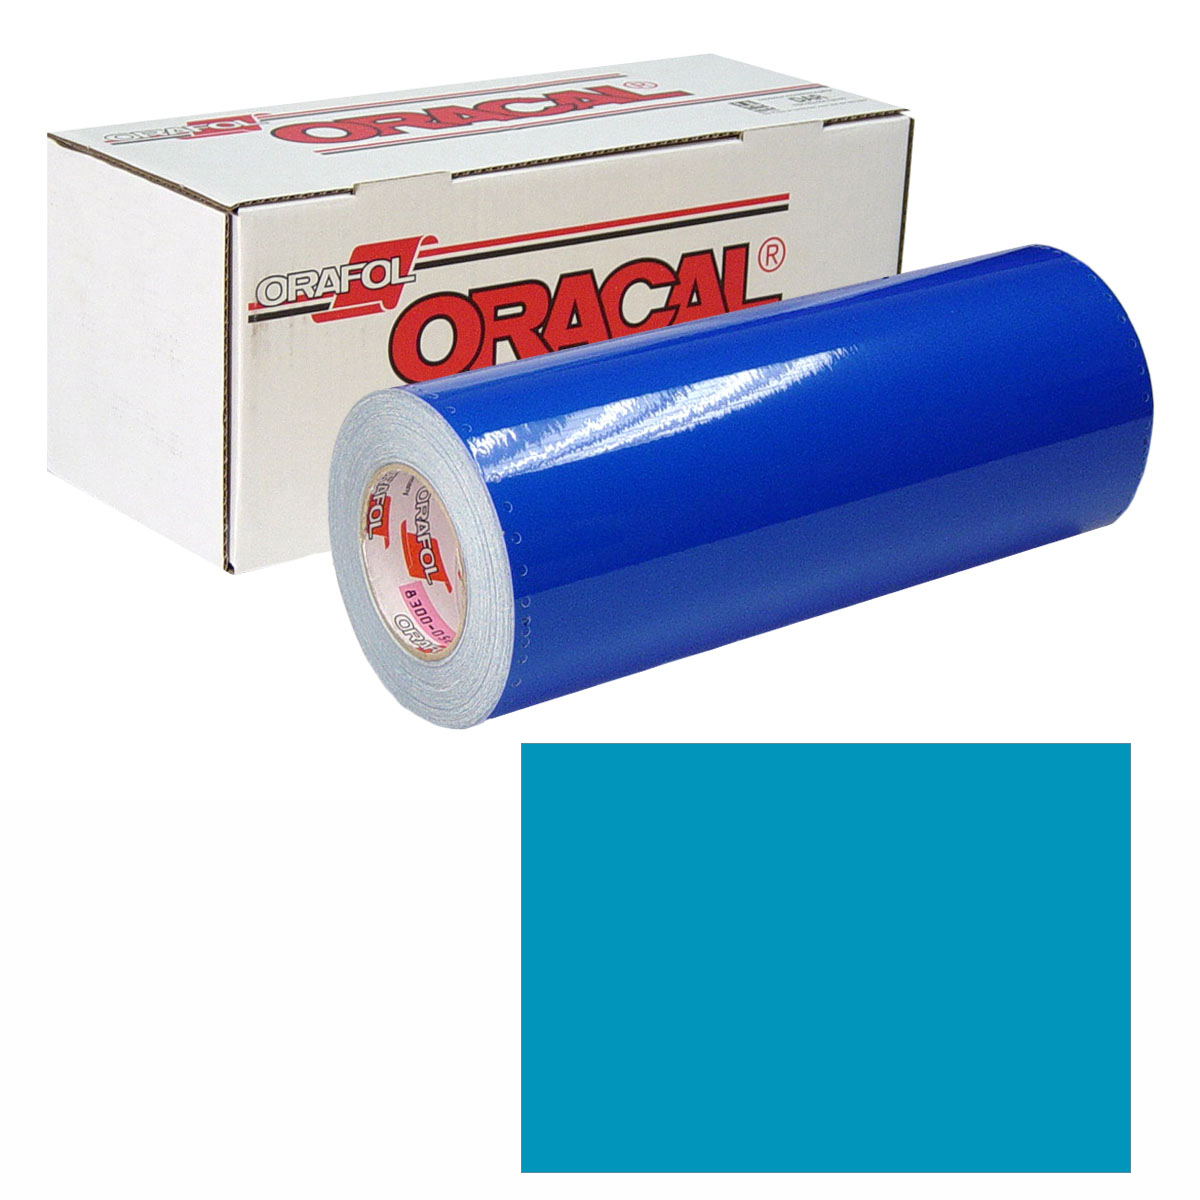 ORACAL 631 30in X 50yd 174 Teal